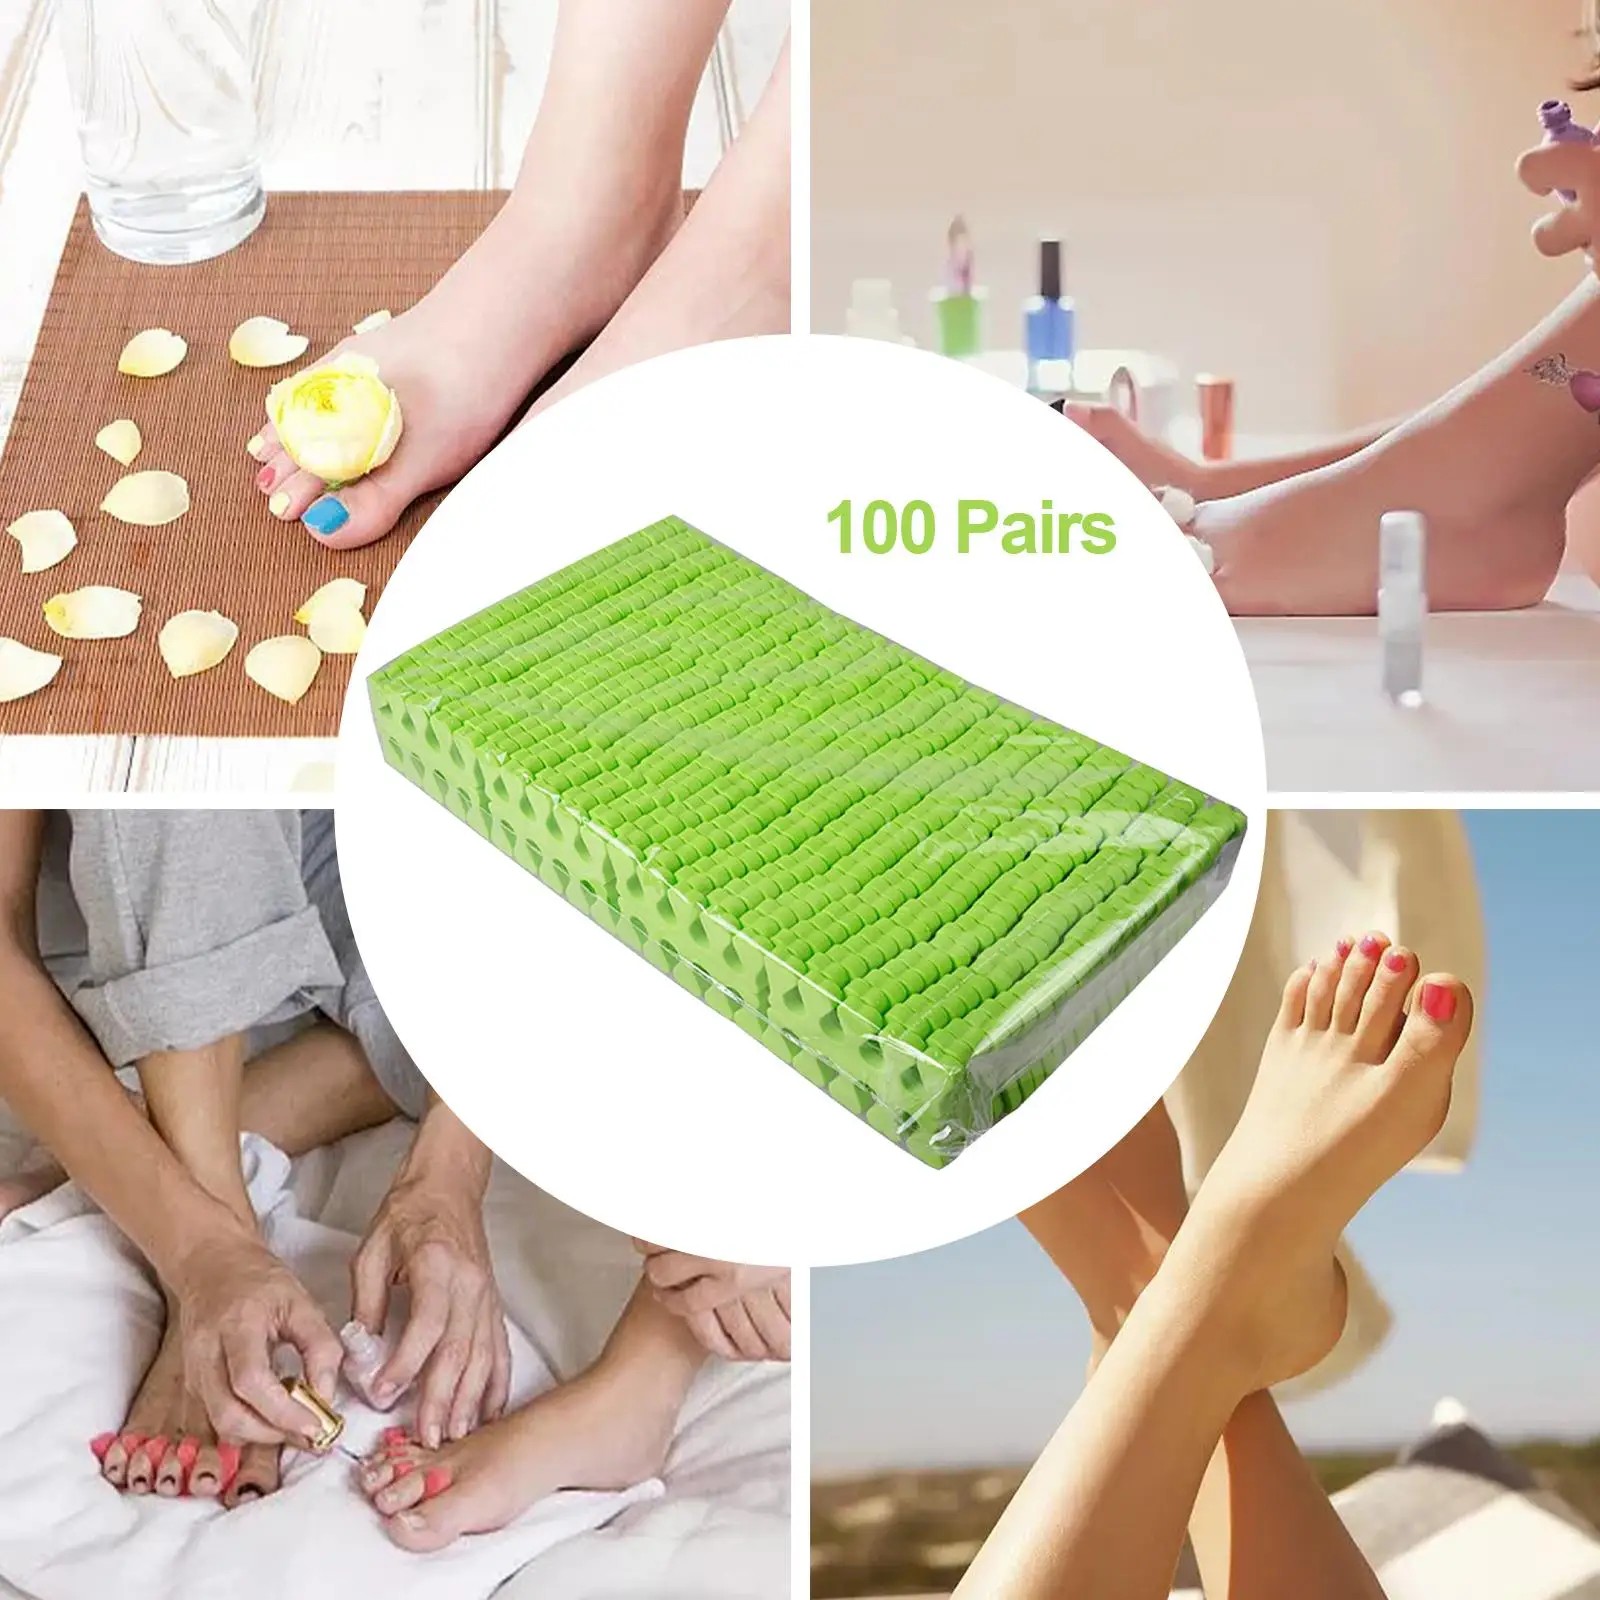  Toe Separator Soft Sponge Practical  Fixed Splitter for Manicure Pedicures Travel  00 Pairs